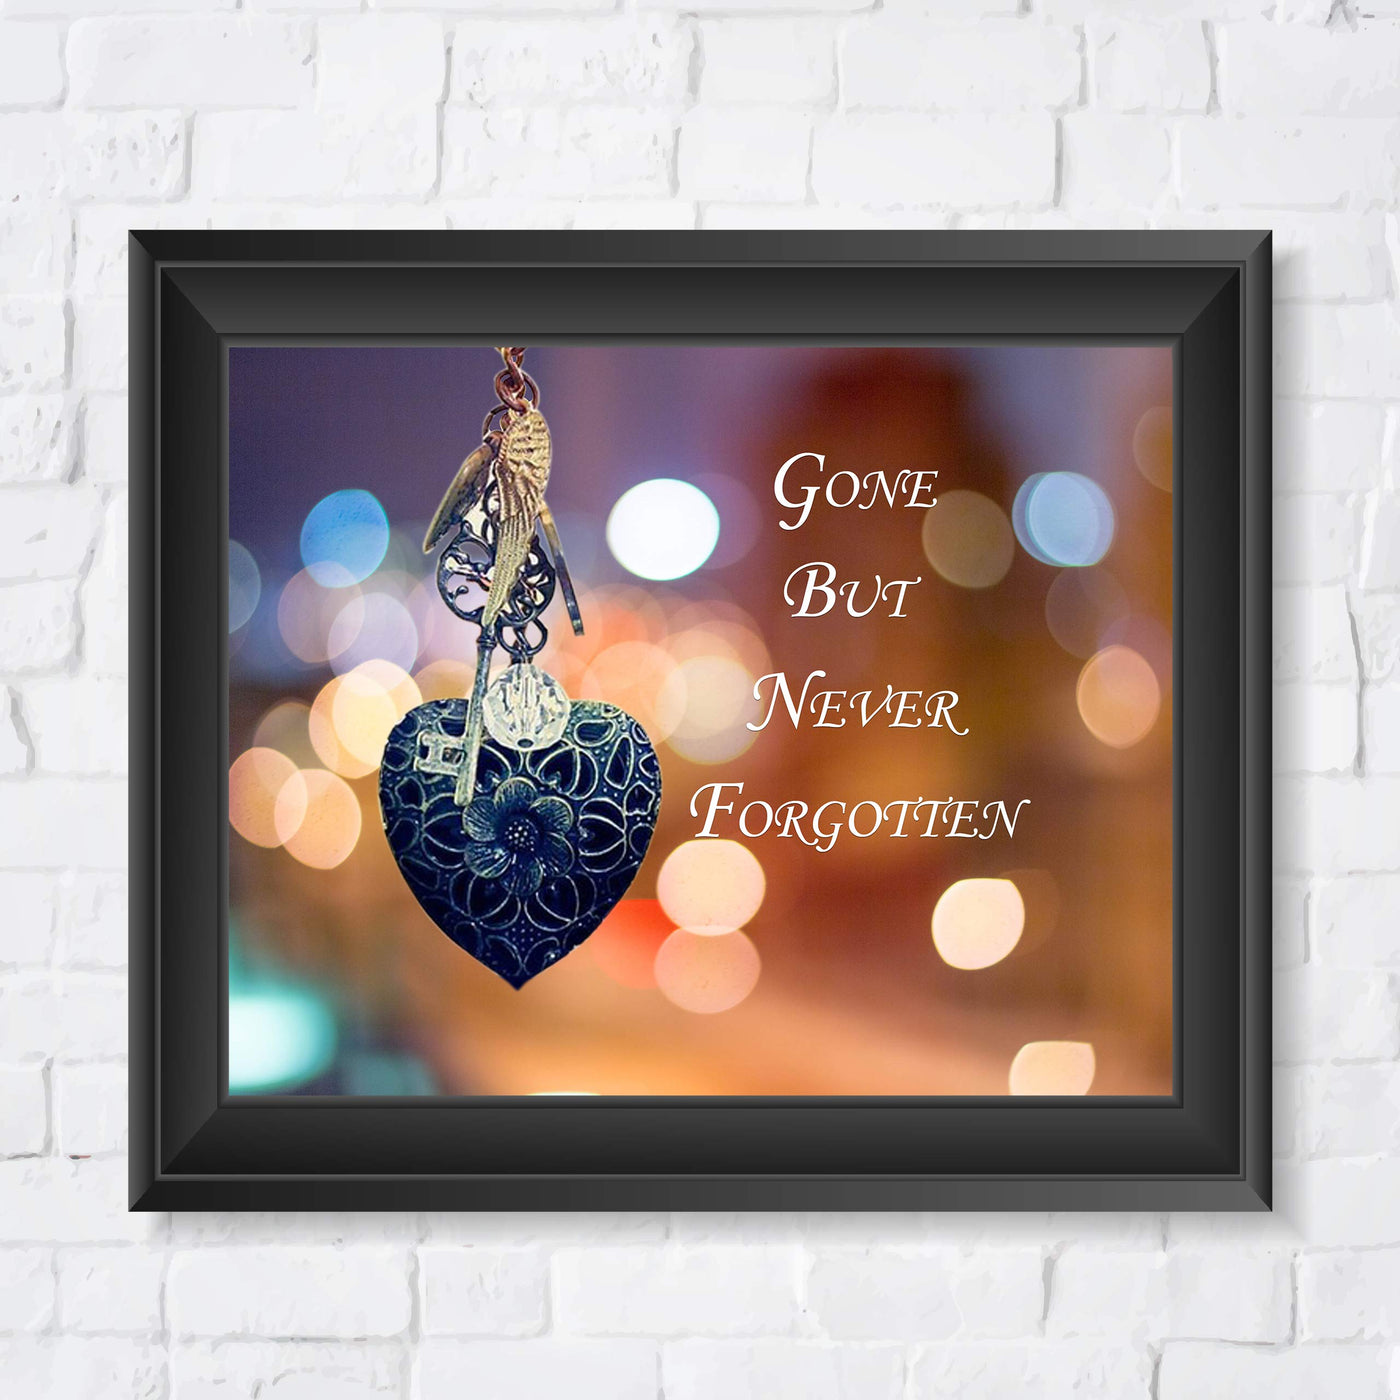 Gone But Never Forgotten-Inspirational Wall Art Decor -10 x 8" Memorial Poster Print w/Heart, Key, and Angel Wing Images-Ready to Frame. Loving, Sentimental Keepsake for Family and Friends.